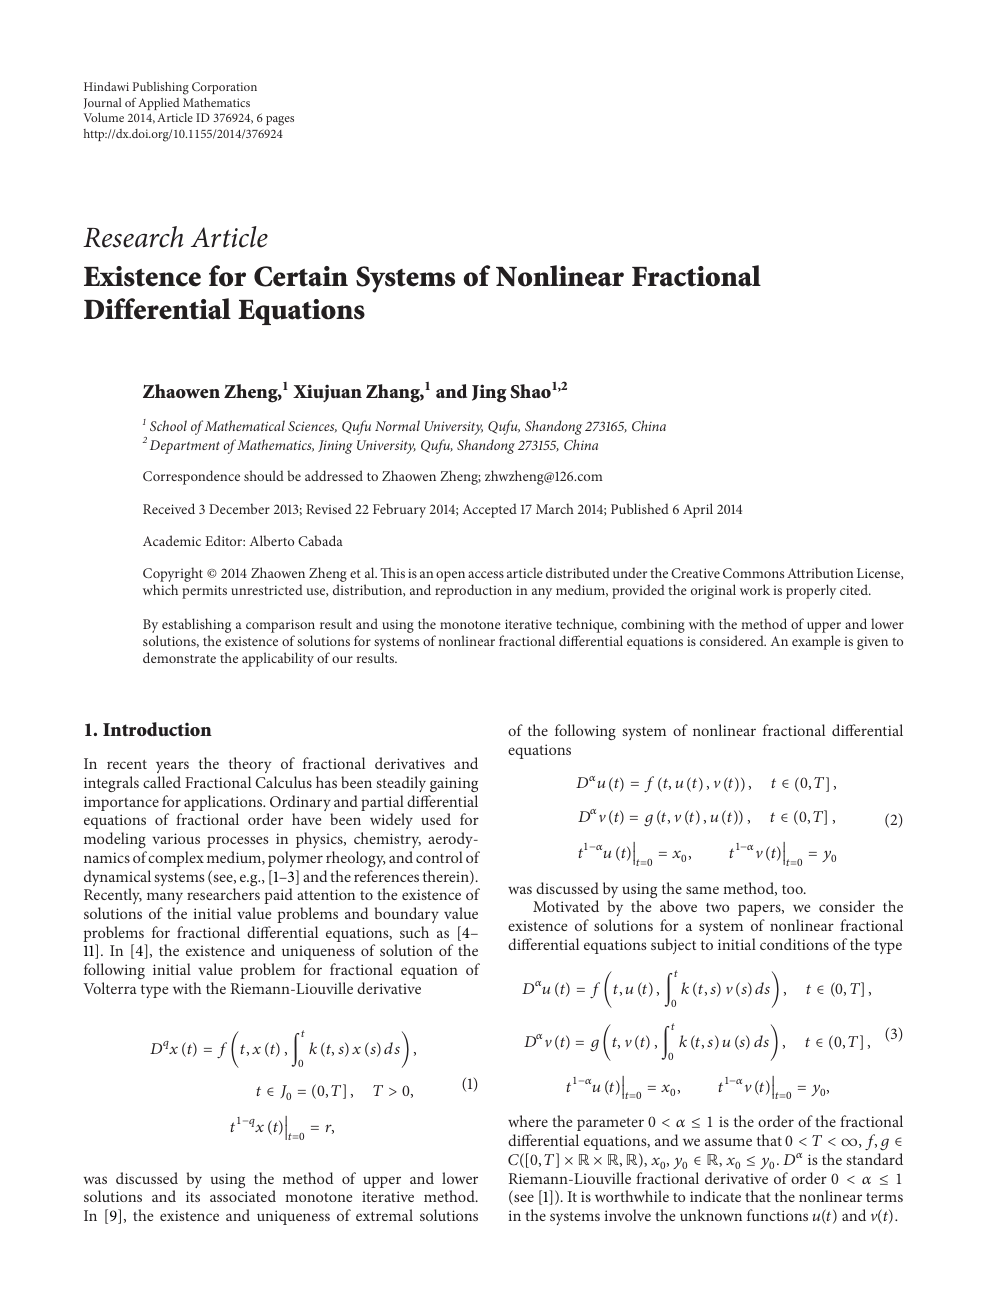 Existence For Certain Systems Of Nonlinear Fractional Differential Equations Topic Of Research Paper In Mathematics Download Scholarly Article Pdf And Read For Free On Cyberleninka Open Science Hub